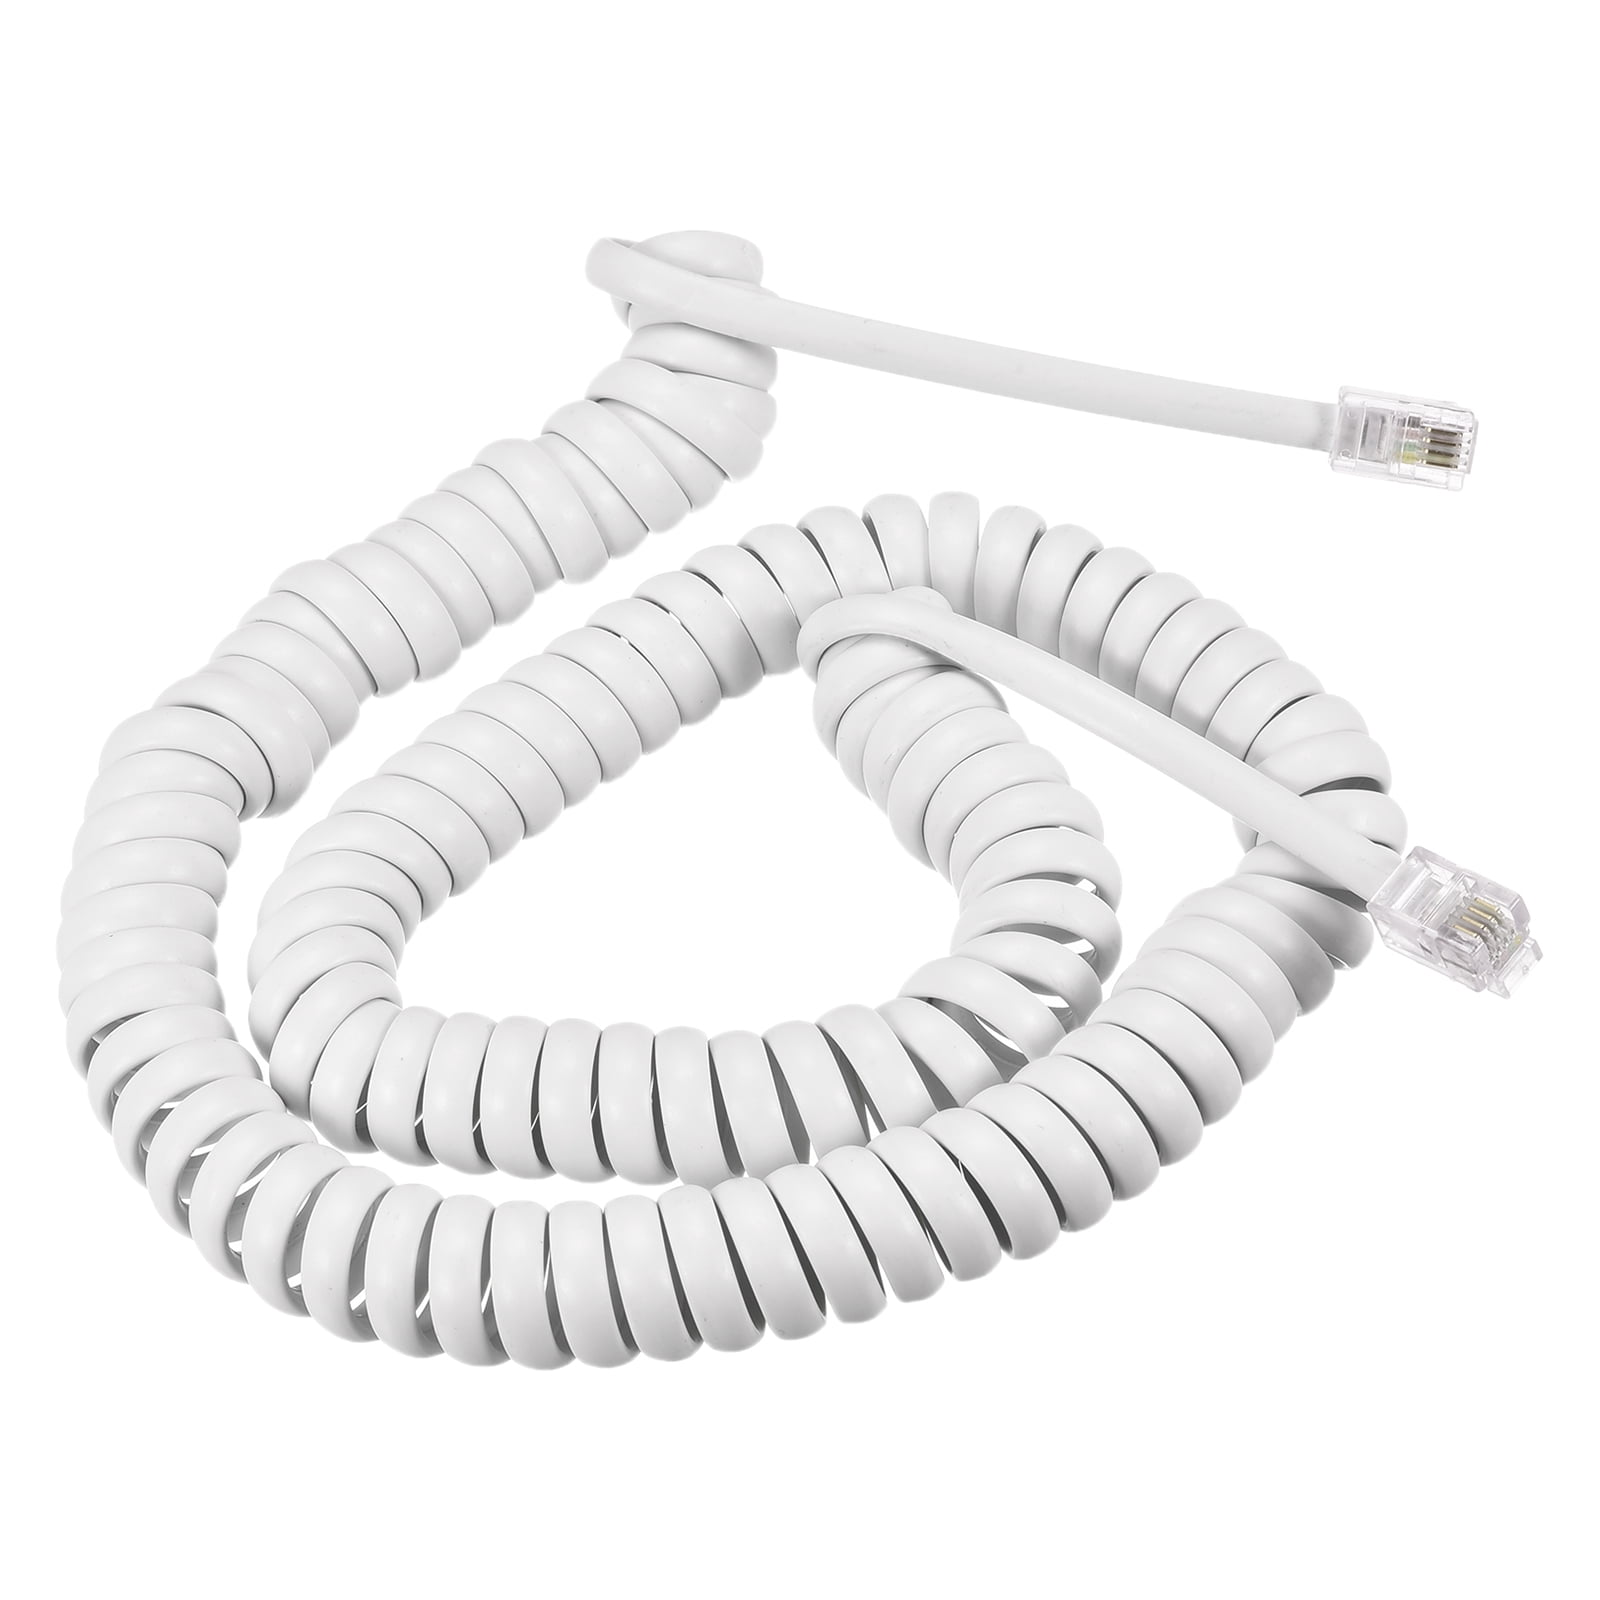 Generic Handset Cord White 12 Ft Phone Curly Coil Foot 4P4C New In Factory Bag 